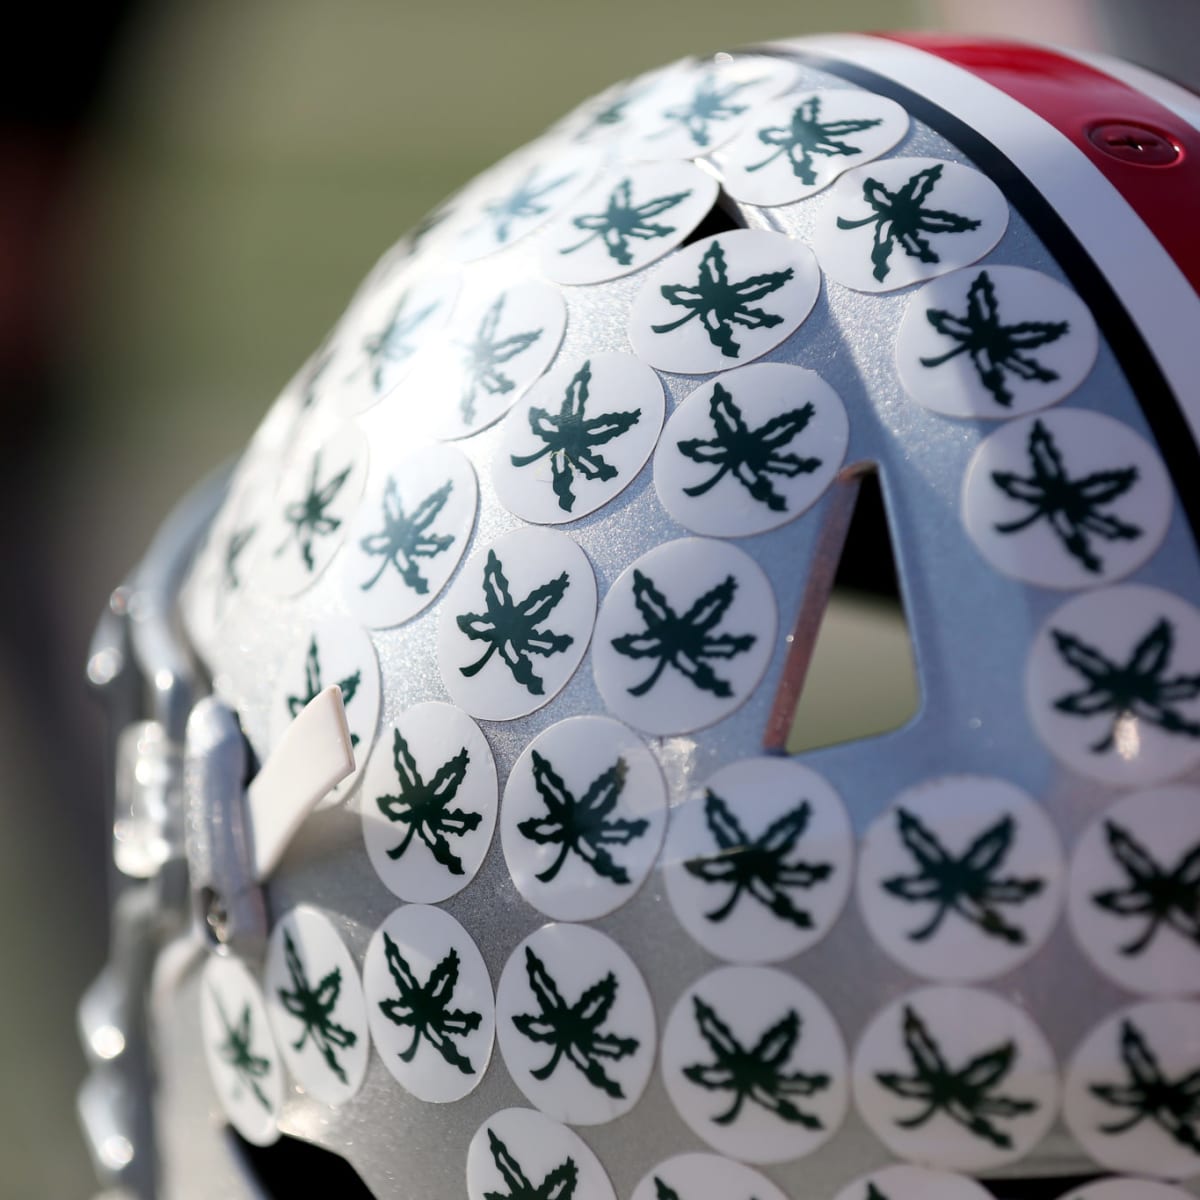 OSU releases statement following death of Class of 2023 recruit